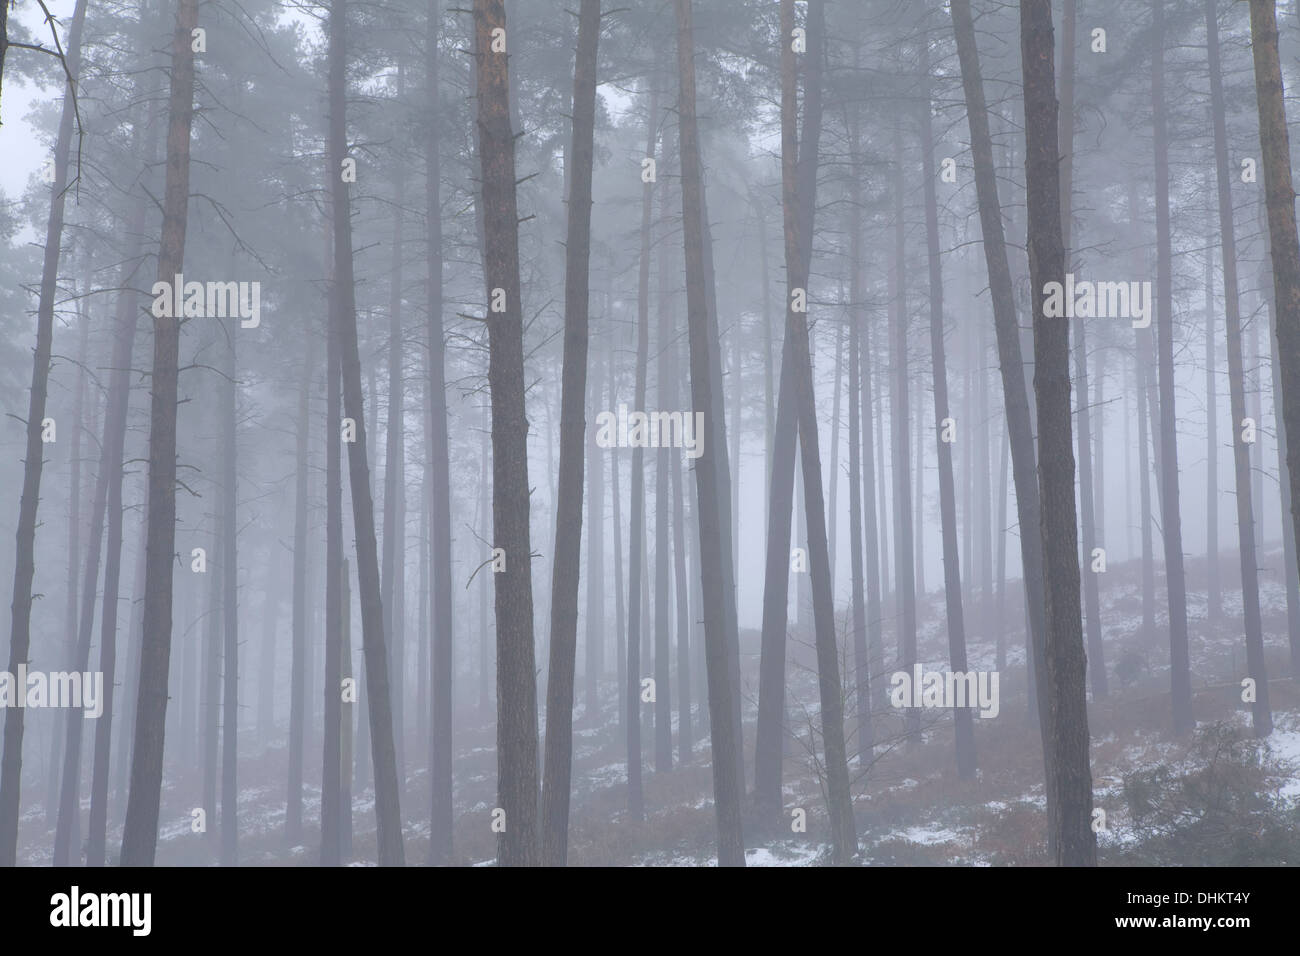 Pine trees in winter shrouded in fog with a light dusting of snow on the ground, Cannock Stock Photo